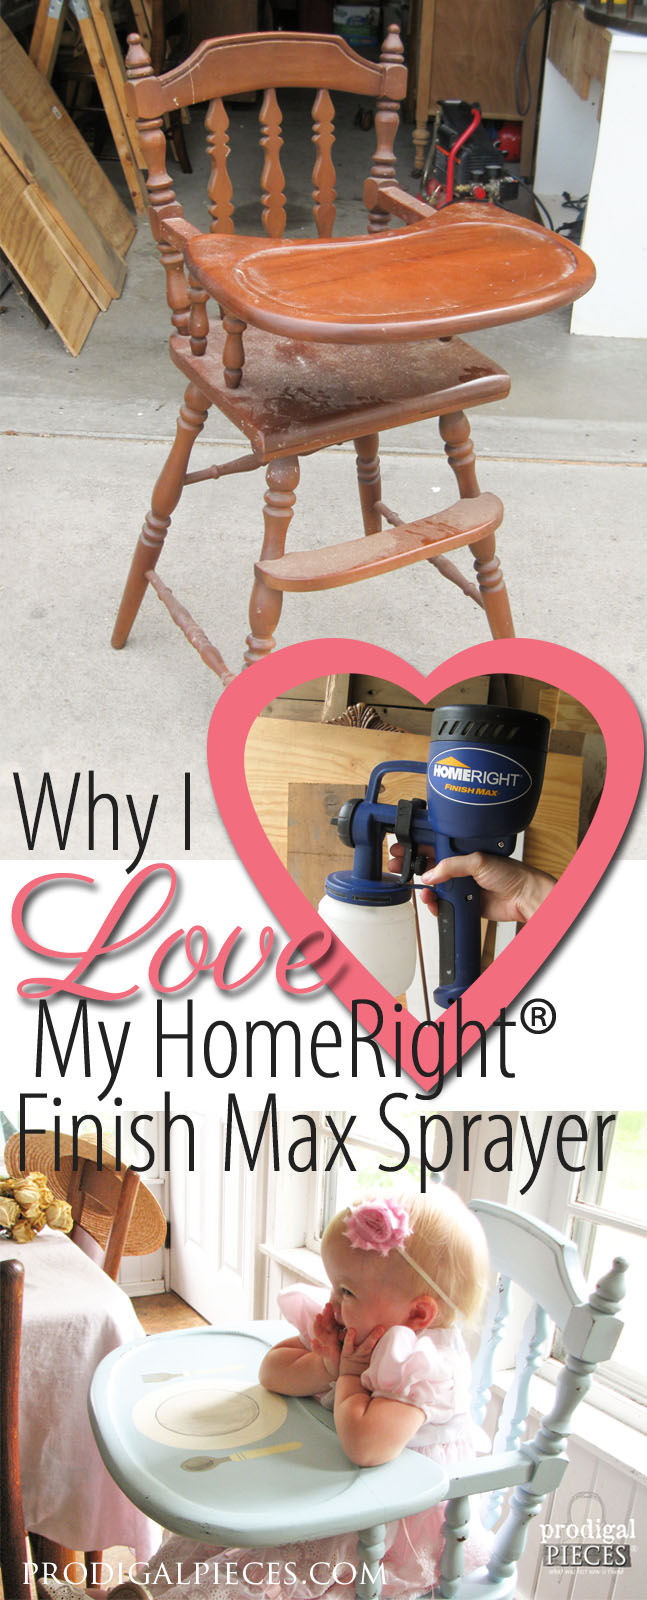 Why I Love My HomeRight Finish Max Paint Sprayer and a GIVEAWAY for YOU! by Prodigal Pieces www.prodigalpieces.com #prodigalpieces